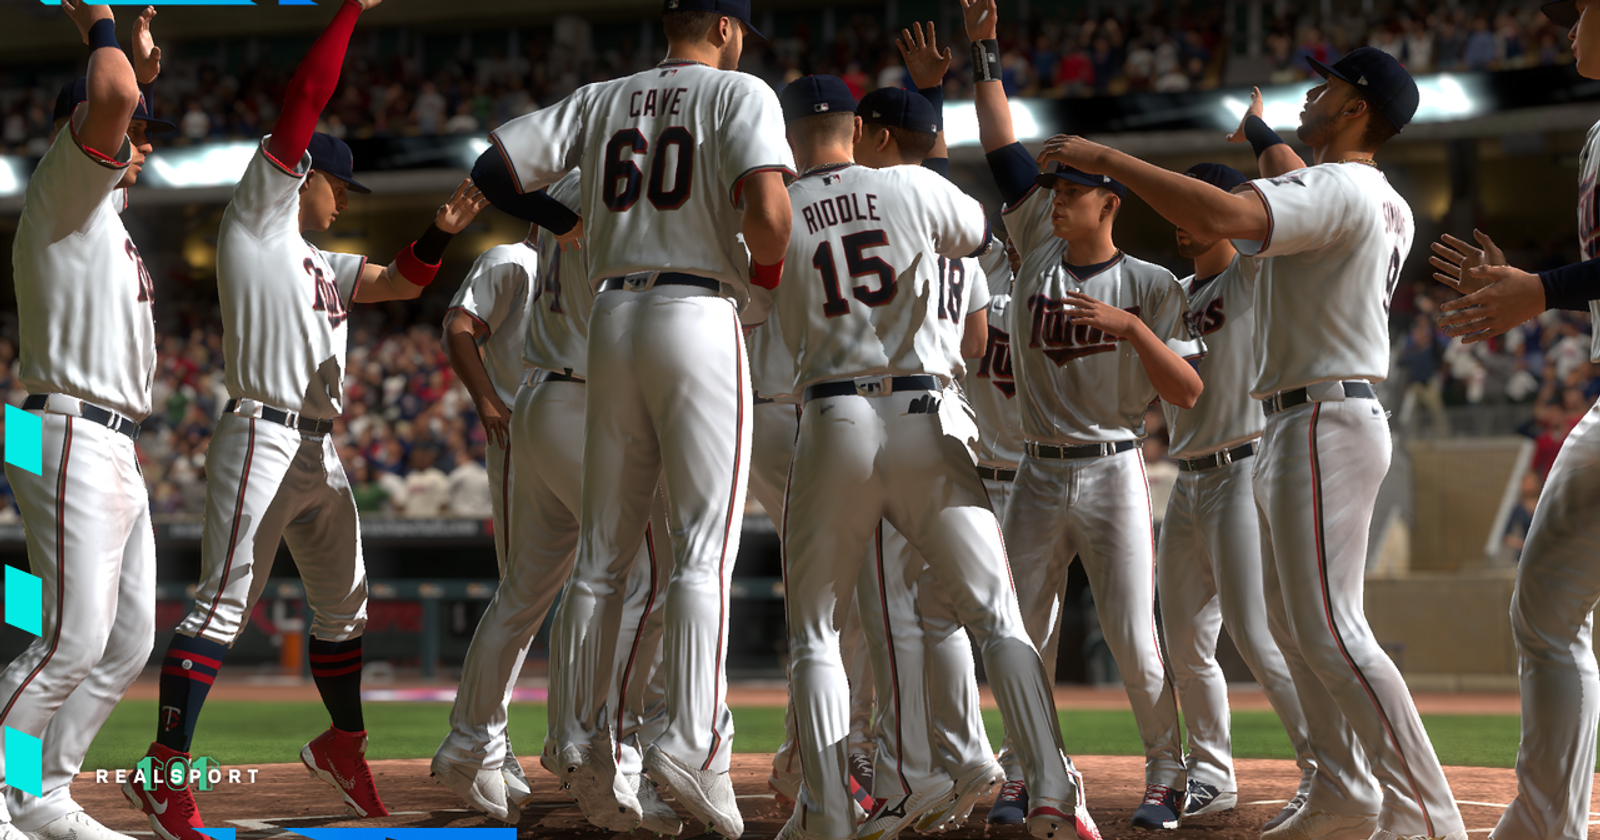 MLB The Show 2022, Life is Strange: True Colors, and more head to